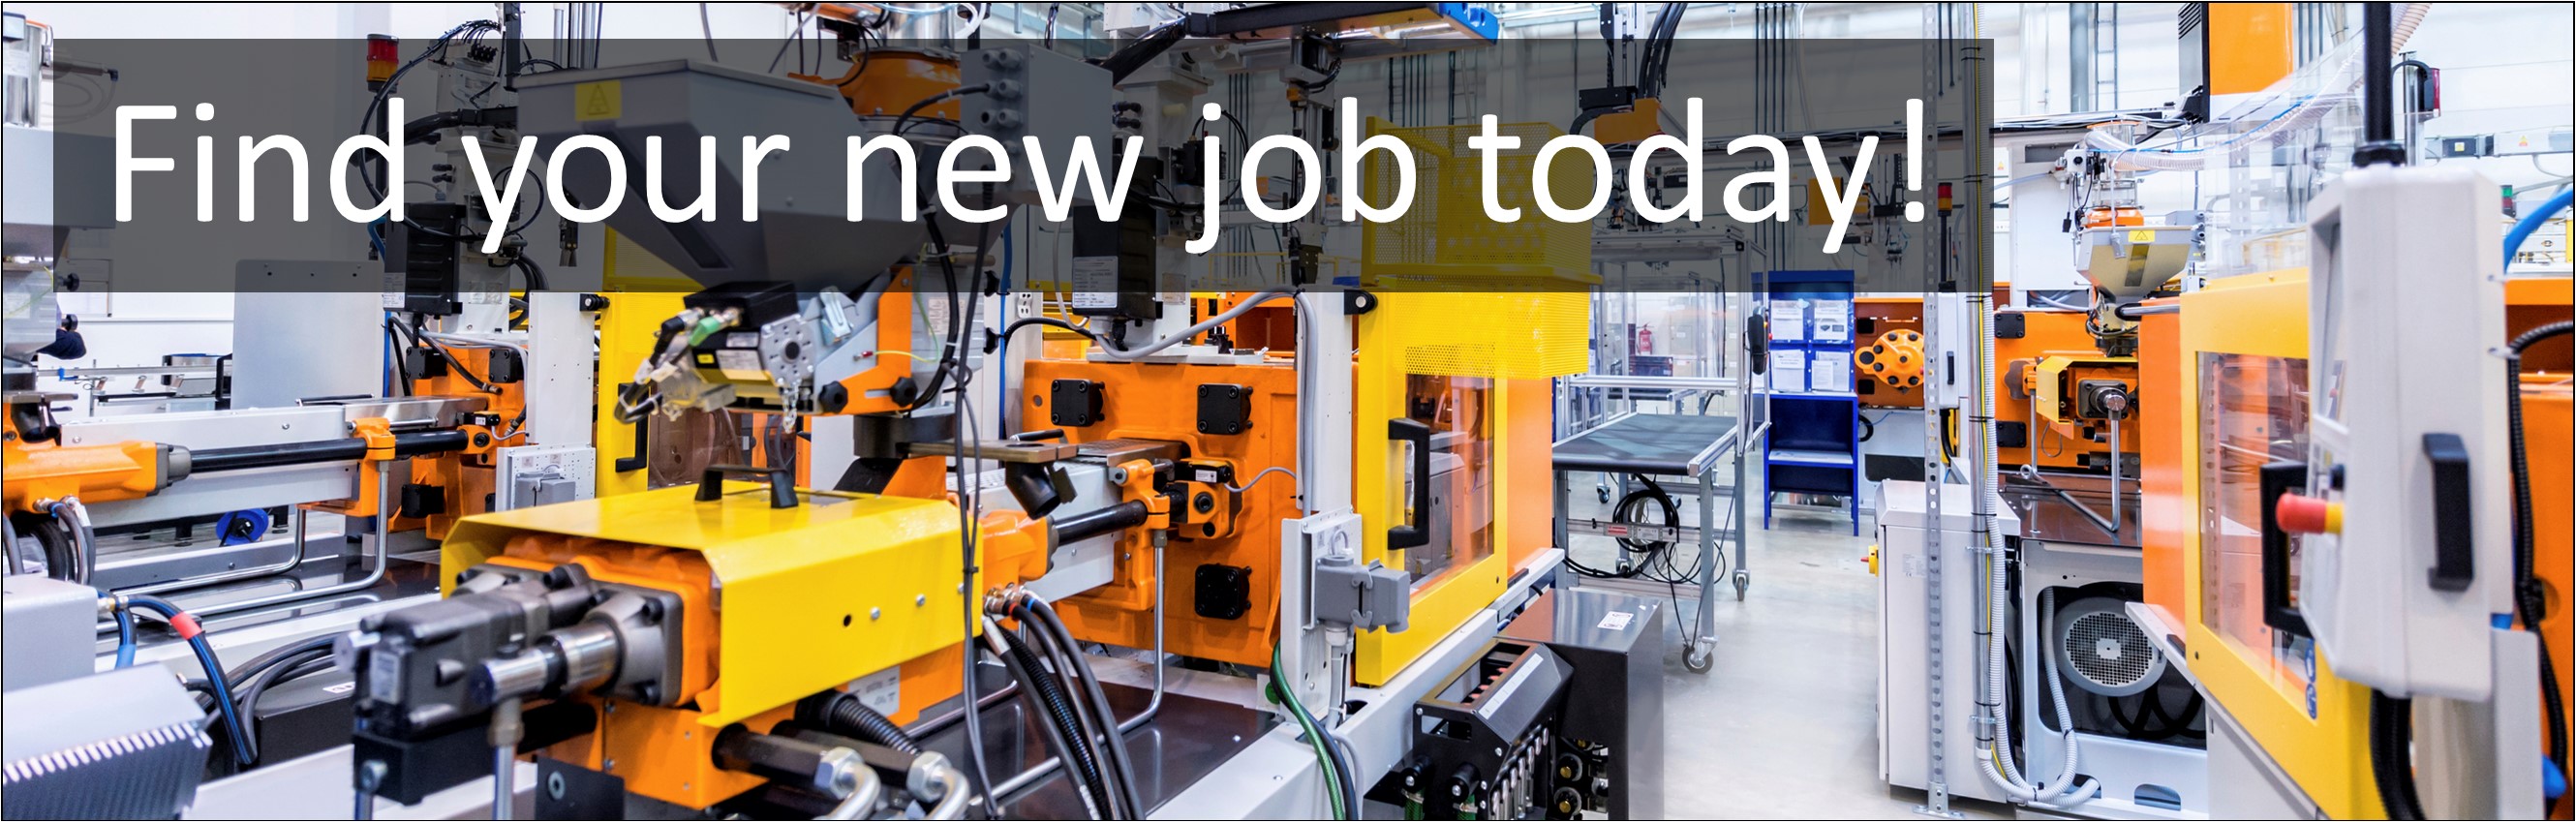 Manufacturing Jobs. Sewing Machinist Jobs, Careers & Vacancies in Birkenhead, Merseyside North West England Advertised by AWD online – Multi-Job Board Advertising and CV Sourcing Recruitment Services